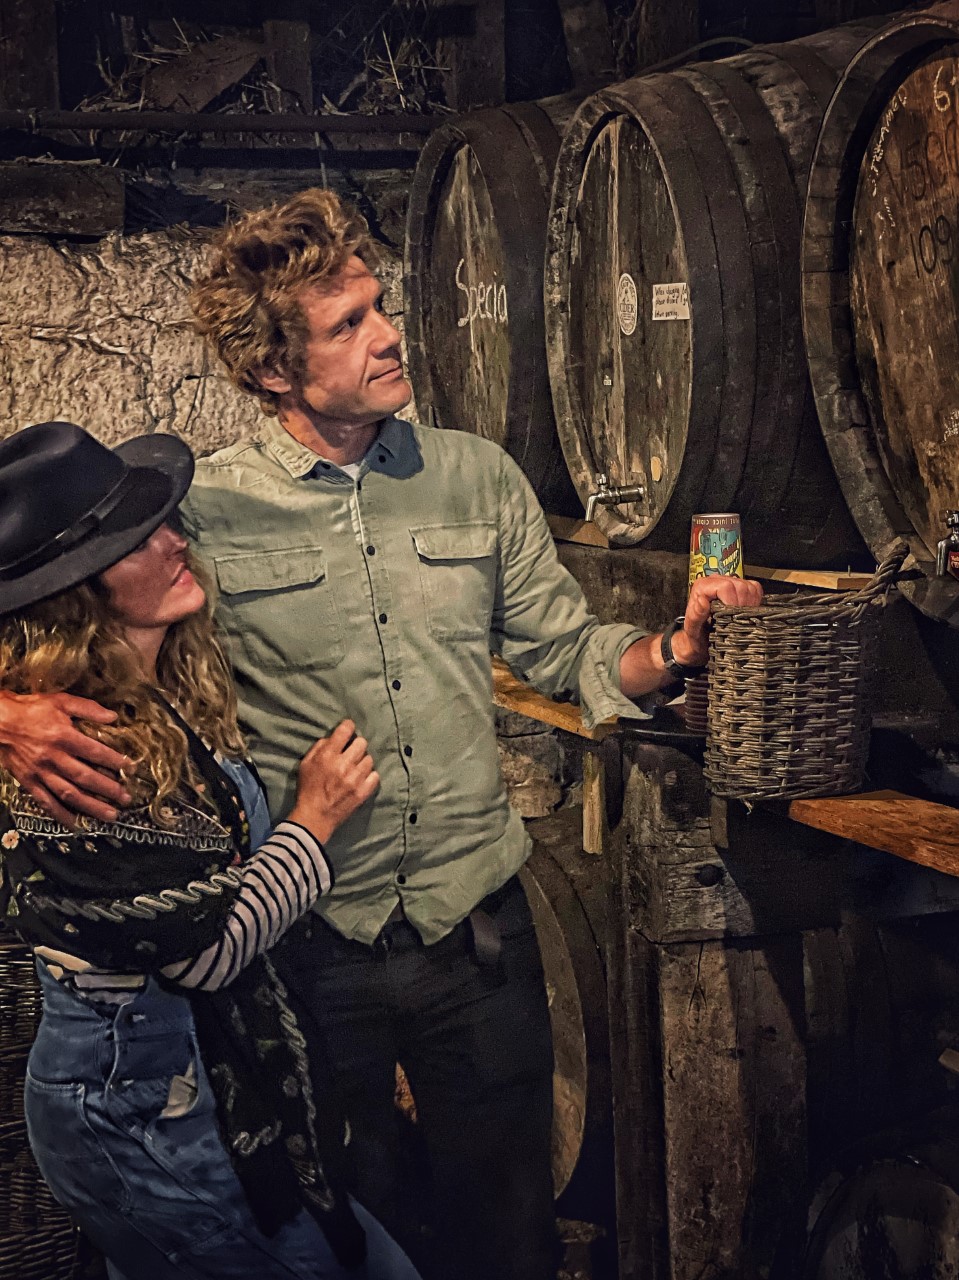 A man in a green shirt with his arm around a woman wearing a hat standing by a distiller in a cellar